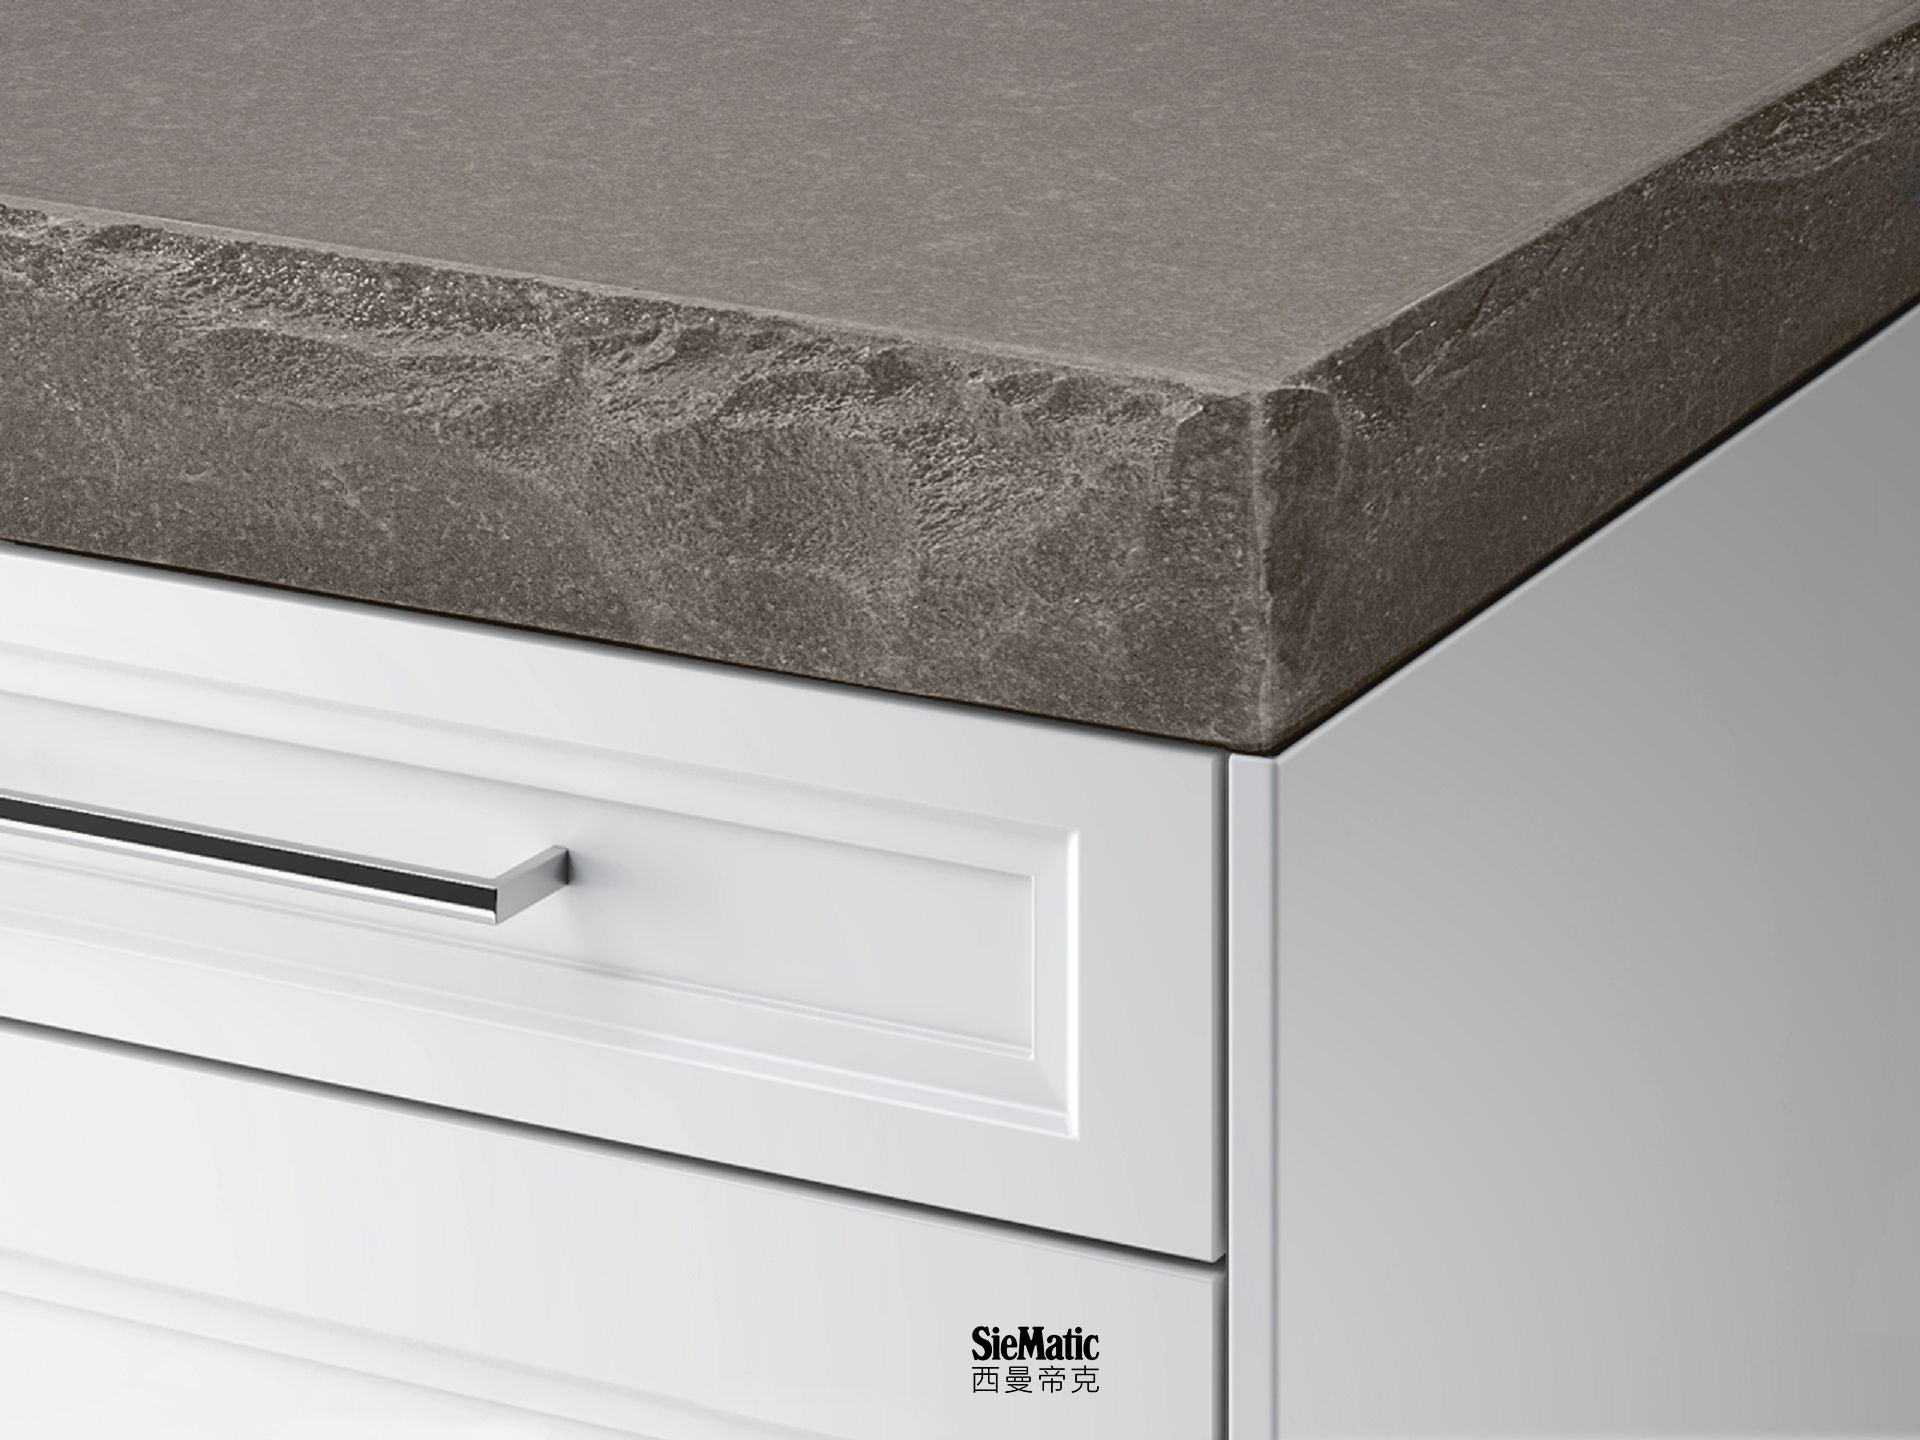 SieMatic StoneDesign kitchen countertop with embossed edge